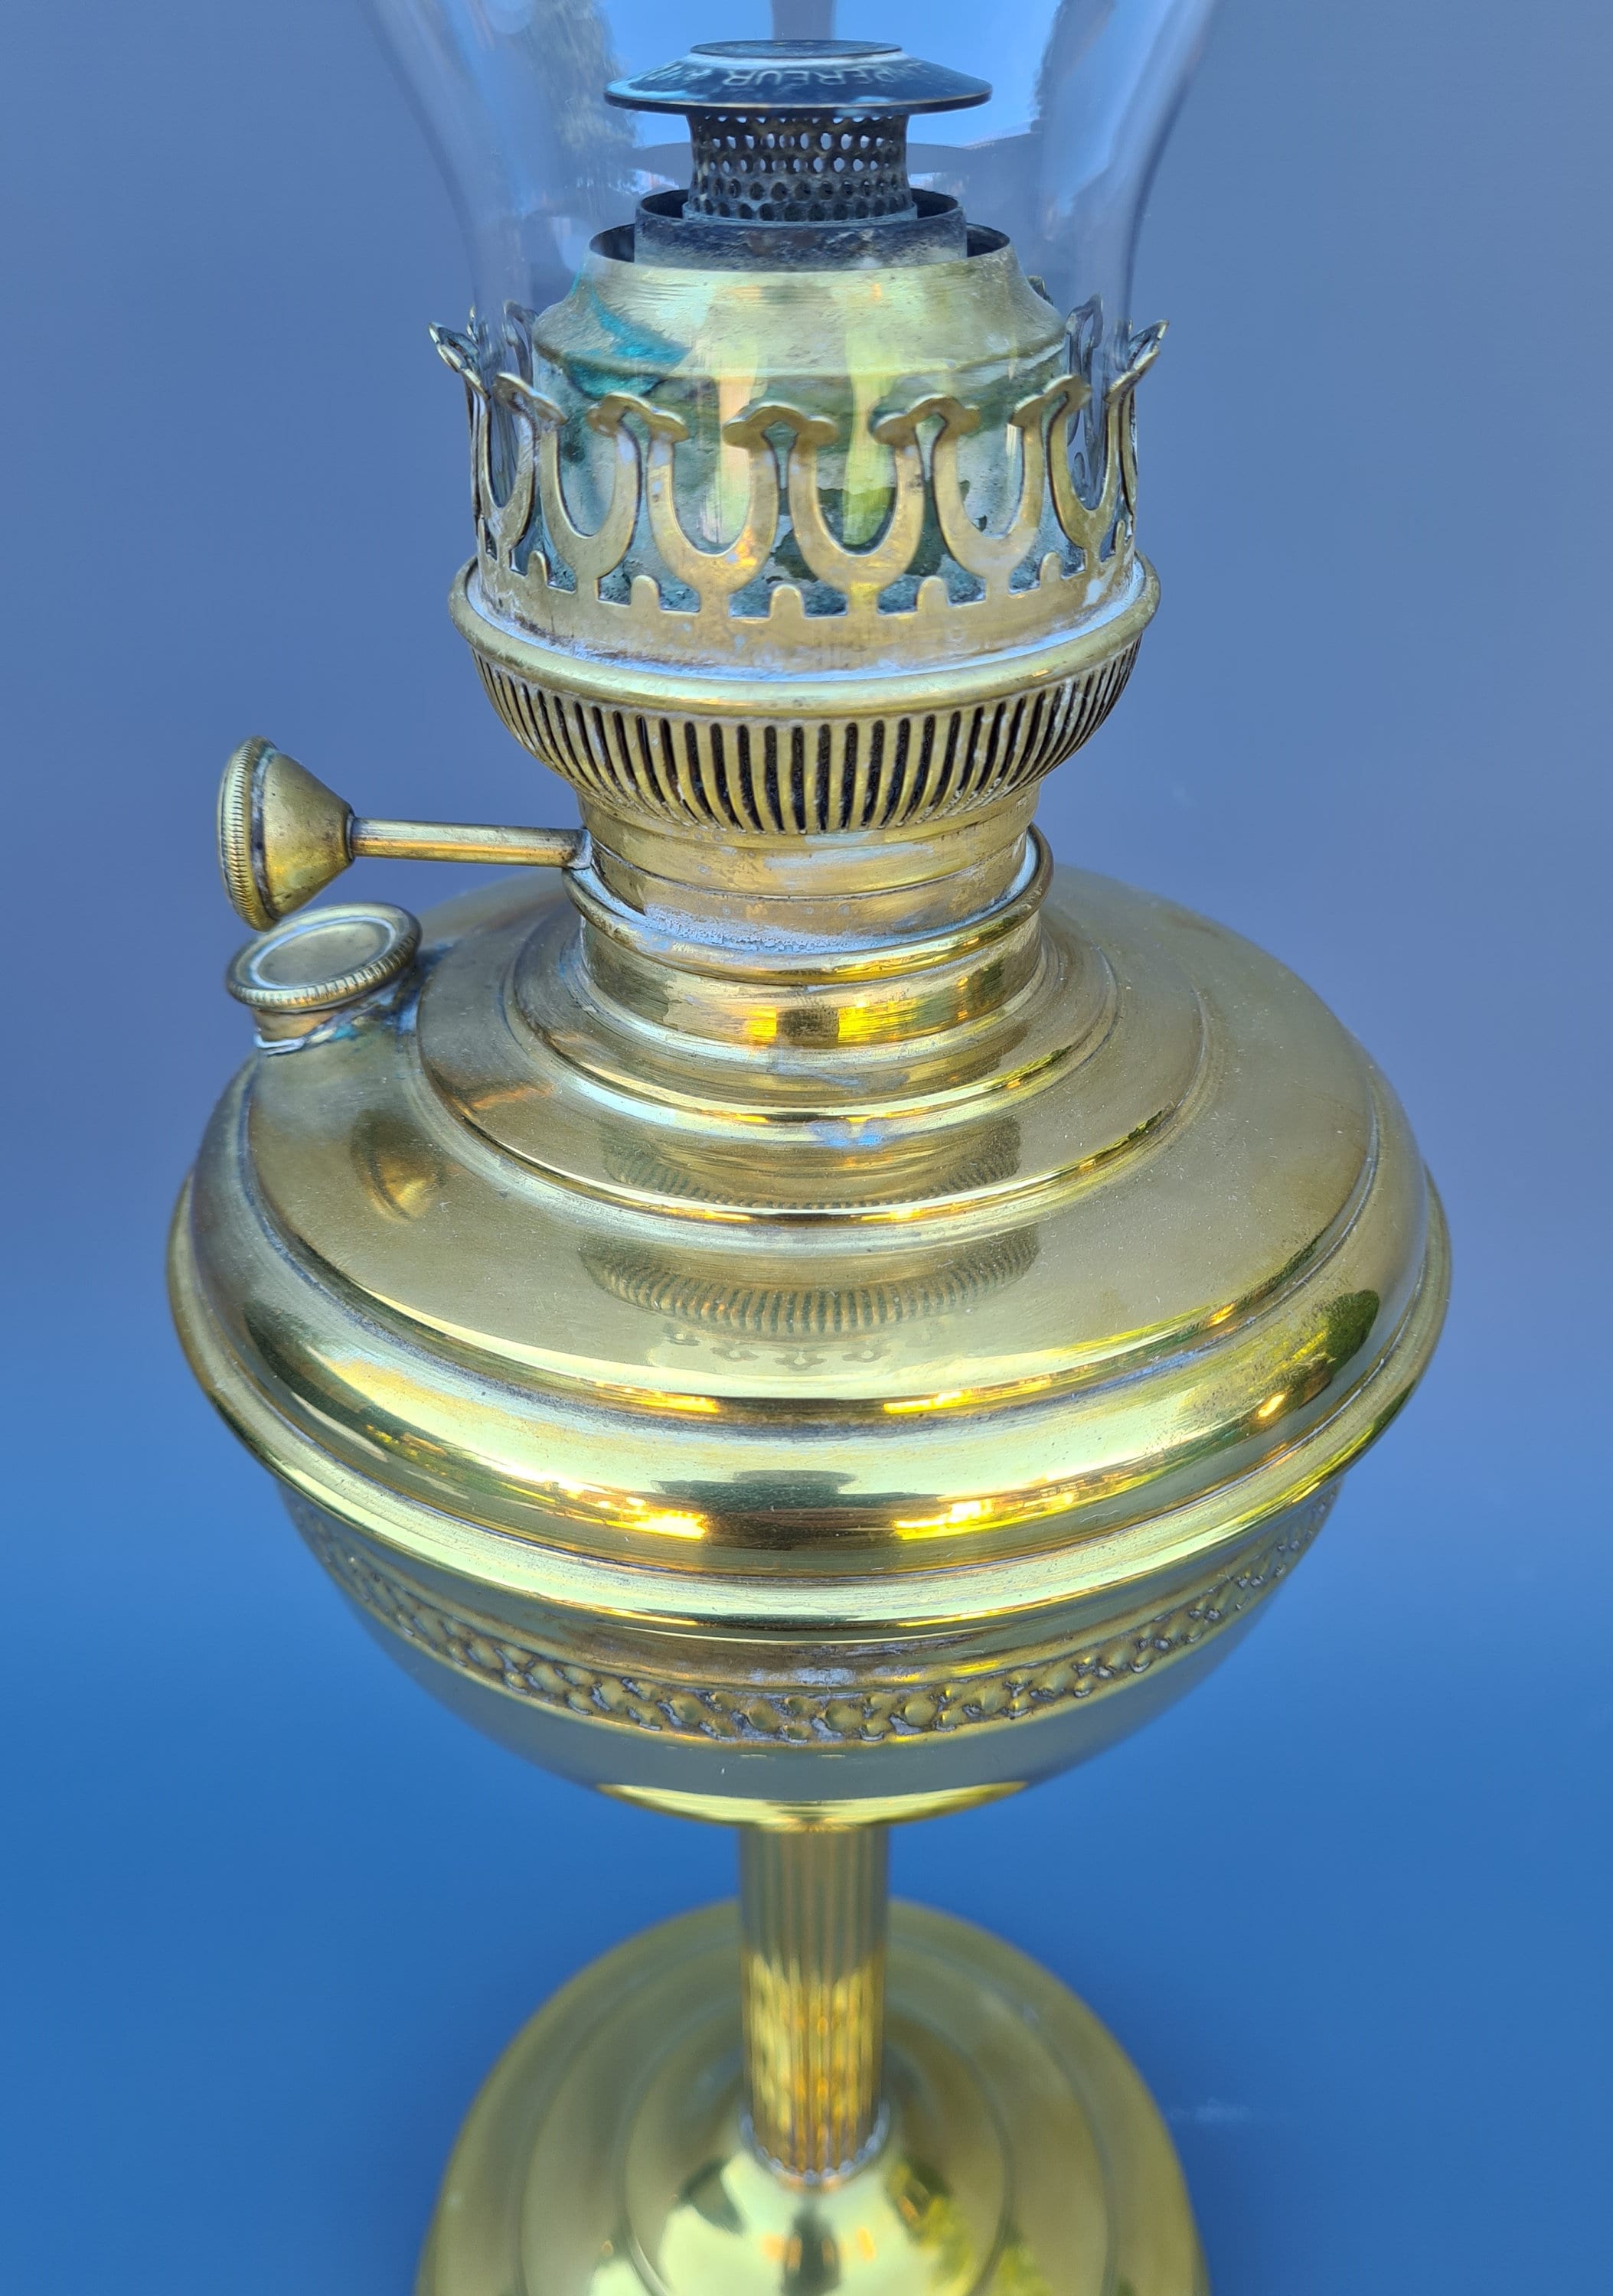 Antique Brass Oil Lamp from Lempereur & Bernard for sale at Pamono